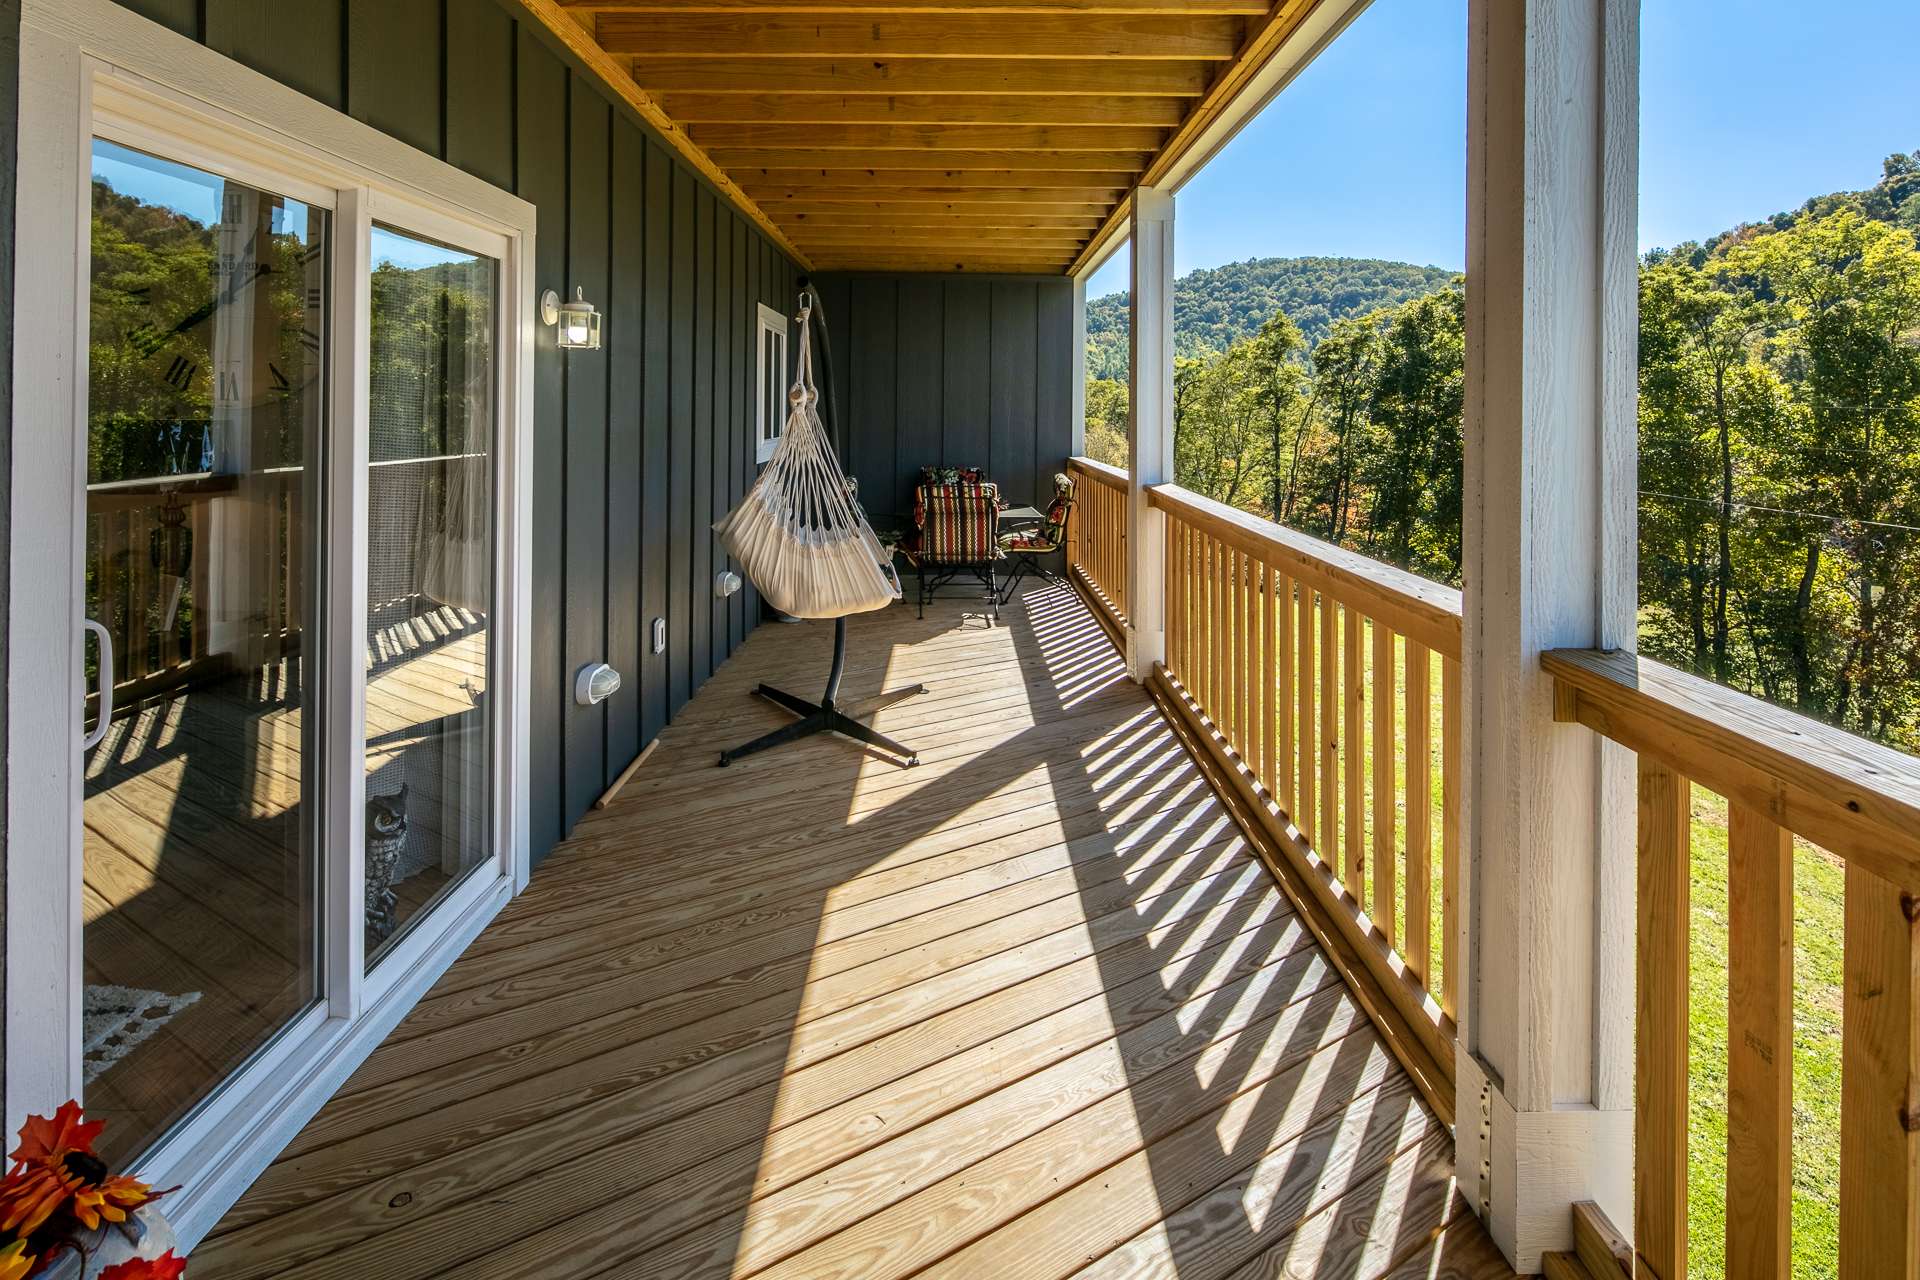 Both main and second levels have covered decks for outdoor relaxing and entertaining.